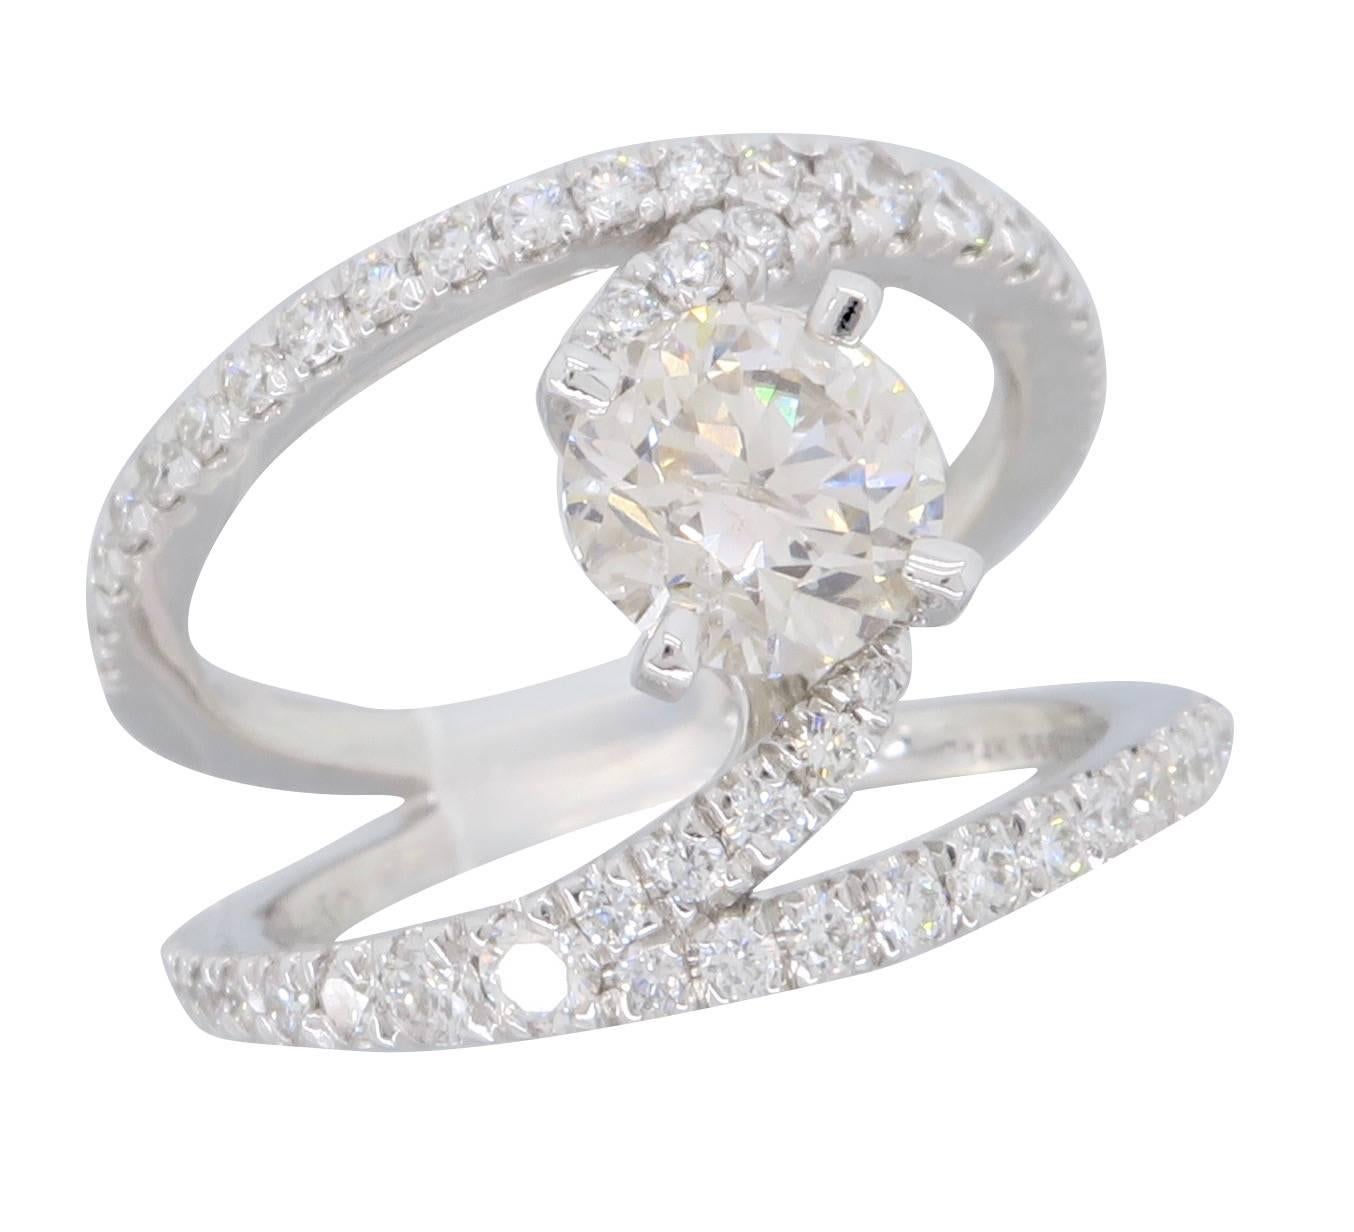 Gabriel & Co NOVA Renewal line ring with a 1.07CT Round Brilliant Cut center diamond. The diamond has K-L color and I clarity. It is accented by 54 more Round Brilliant Cut Diamonds set in a French pave split shank setting. The total diamond weight